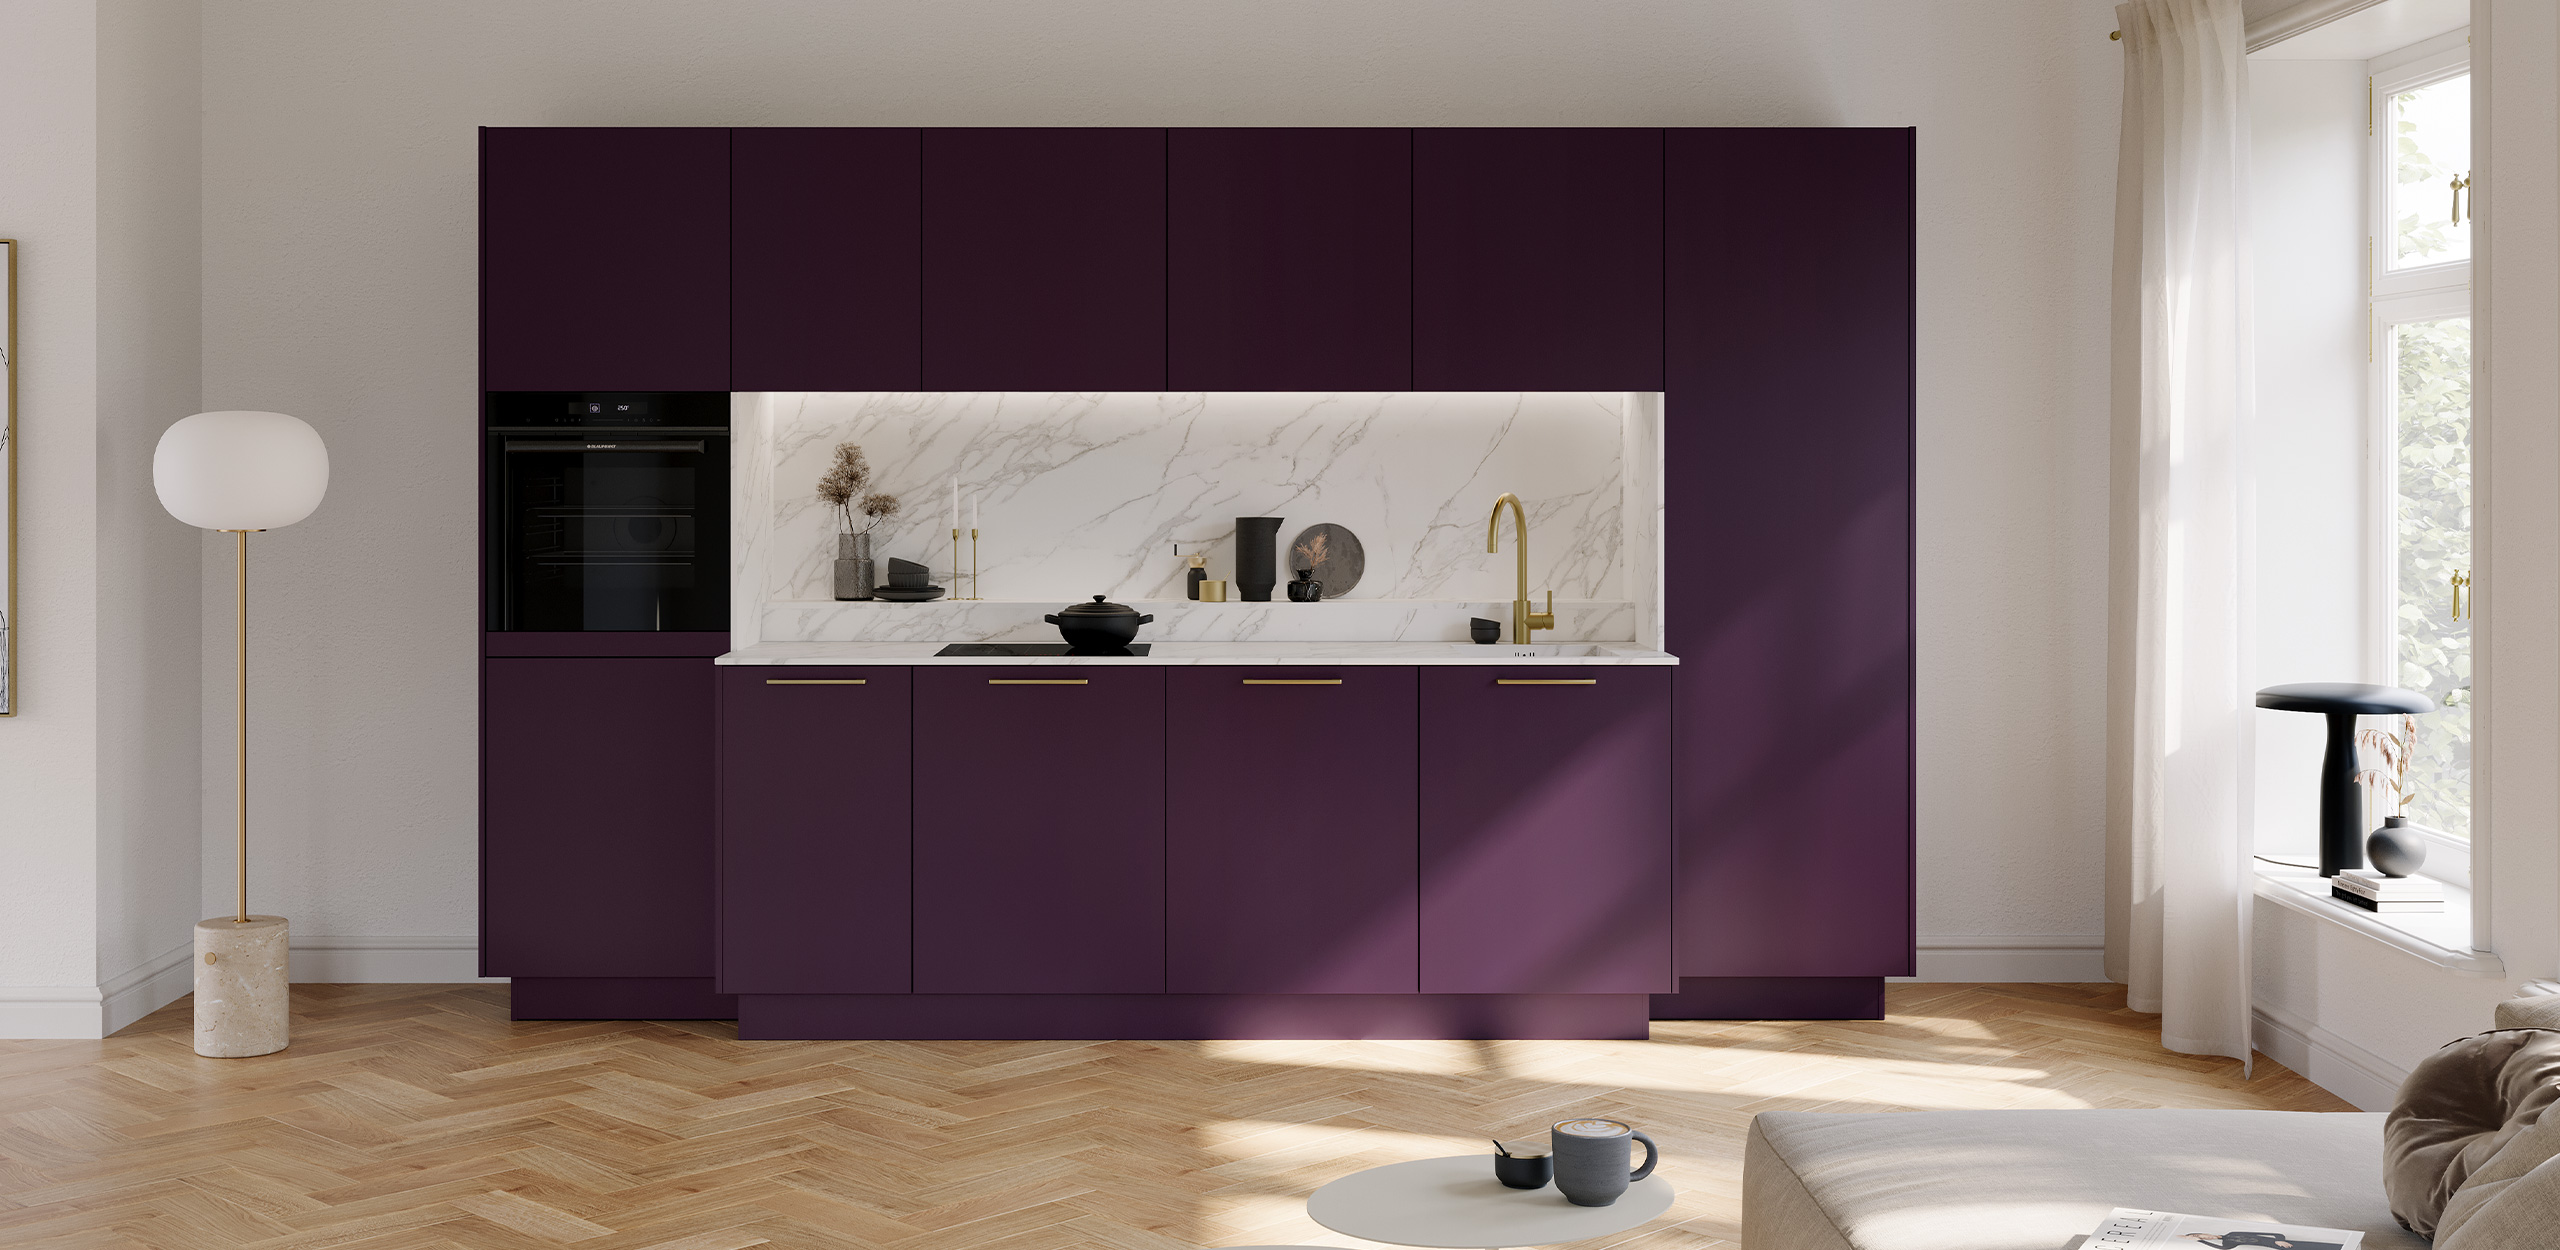 Kitchen unit in Blackberry with gold fittings